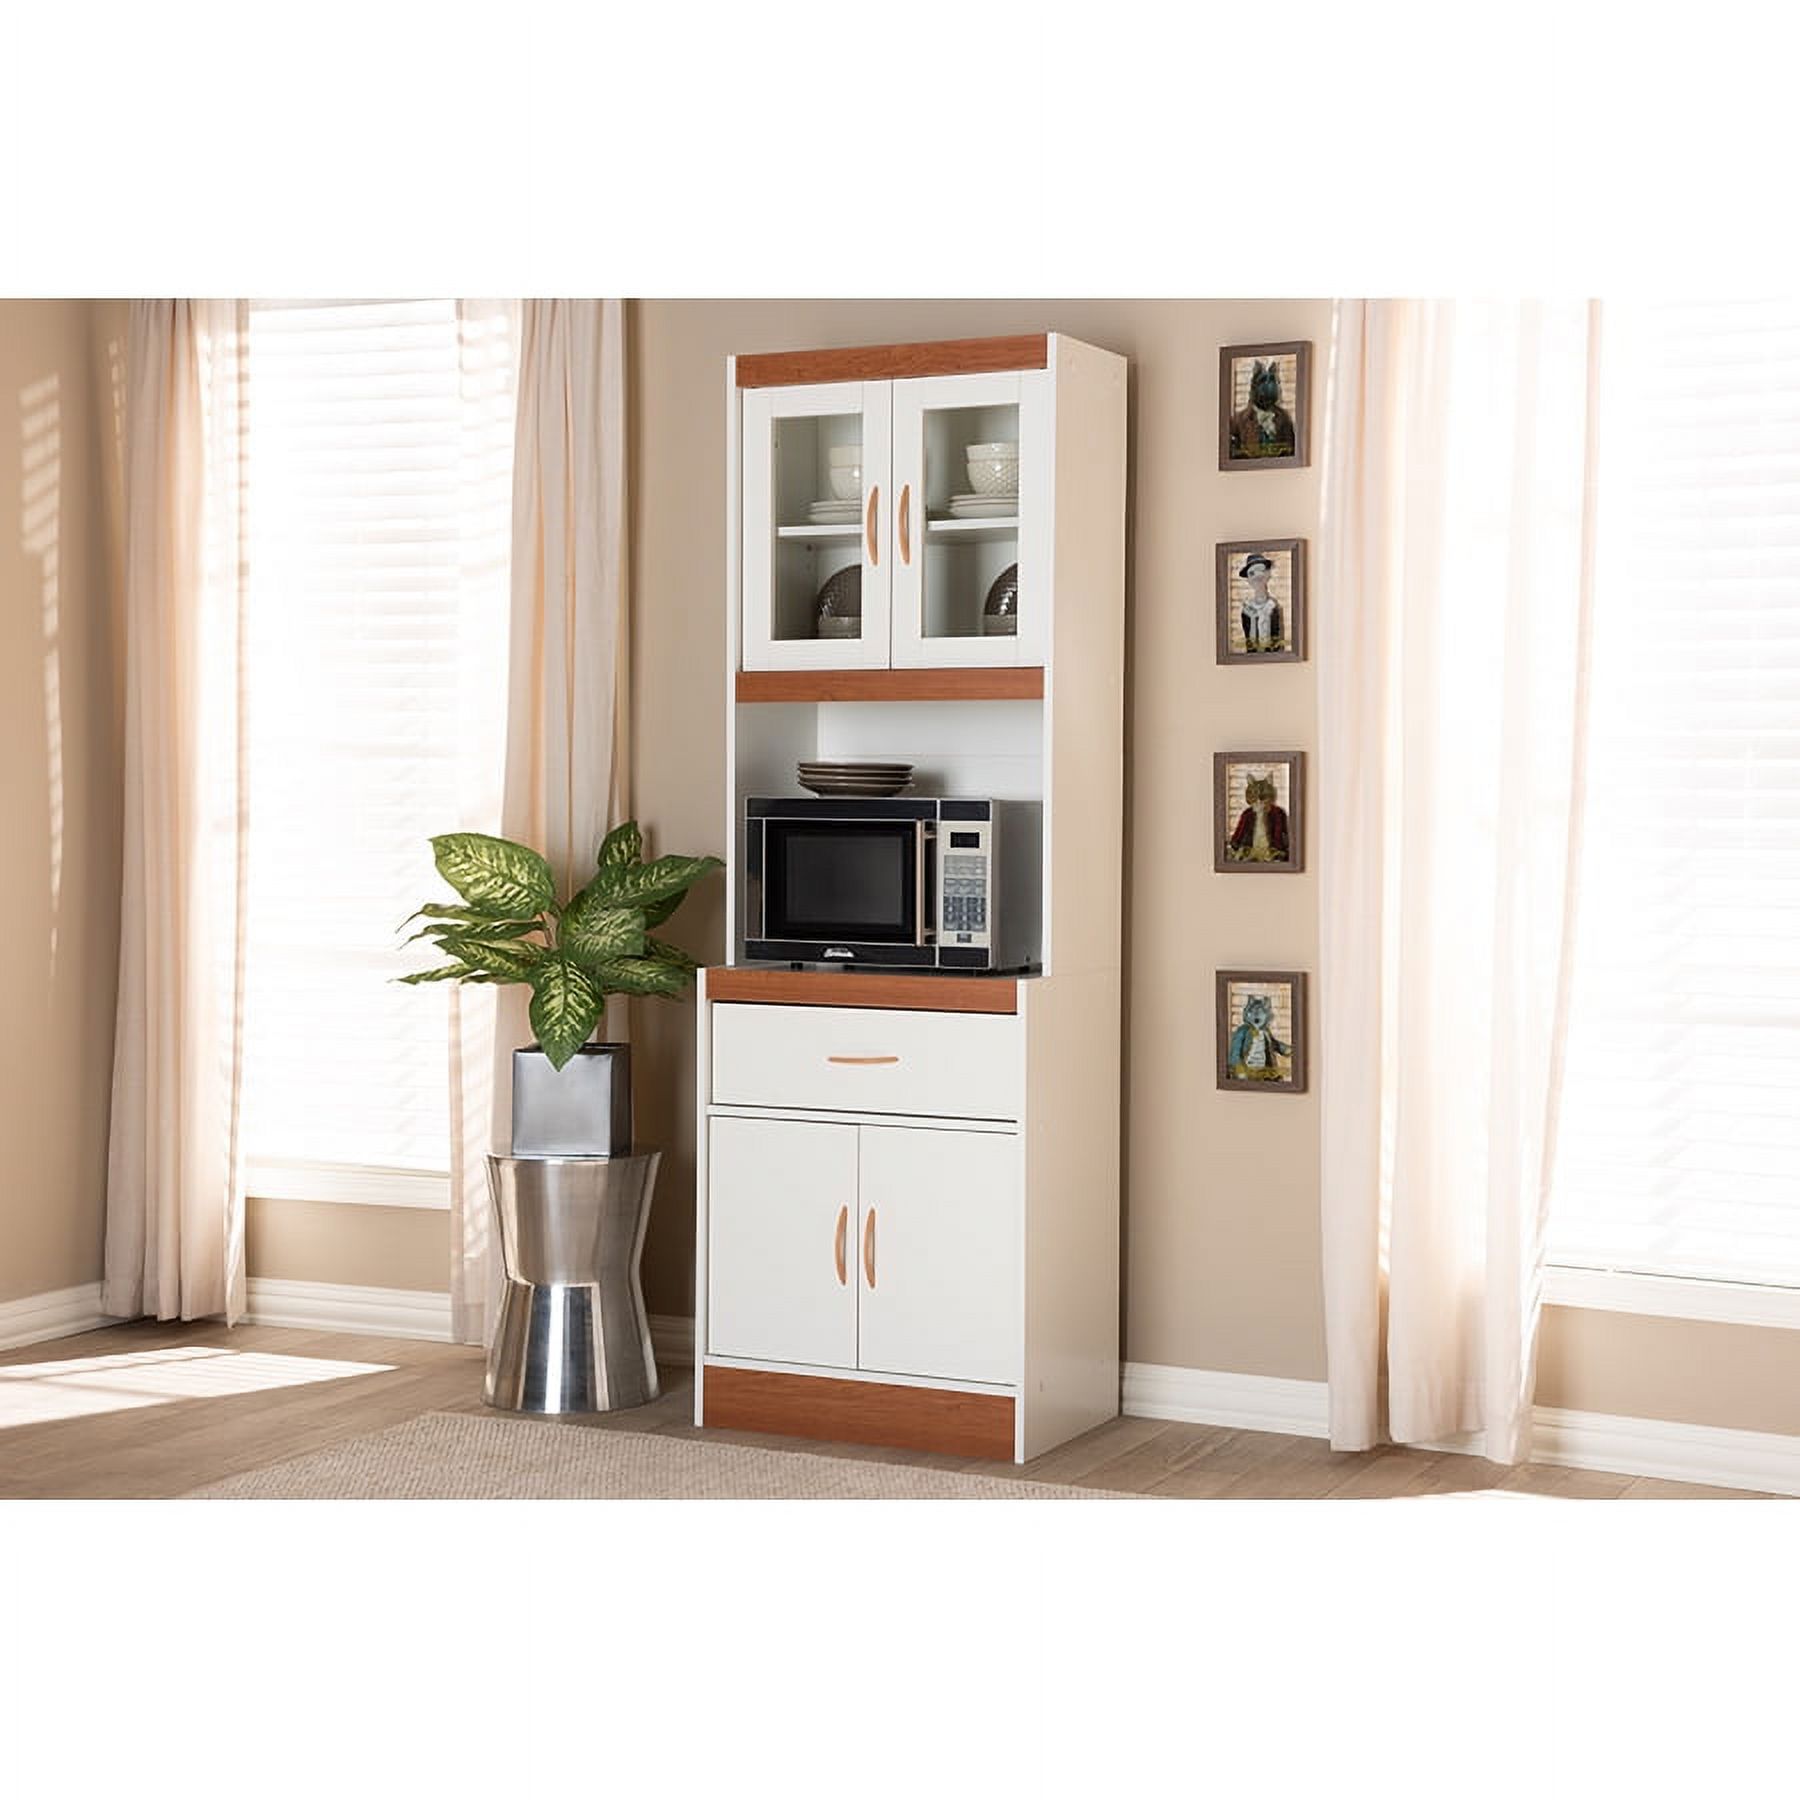 Baxton Studio Laurana White and Cherry Finished Kitchen Cabinet and Hutch - image 1 of 7